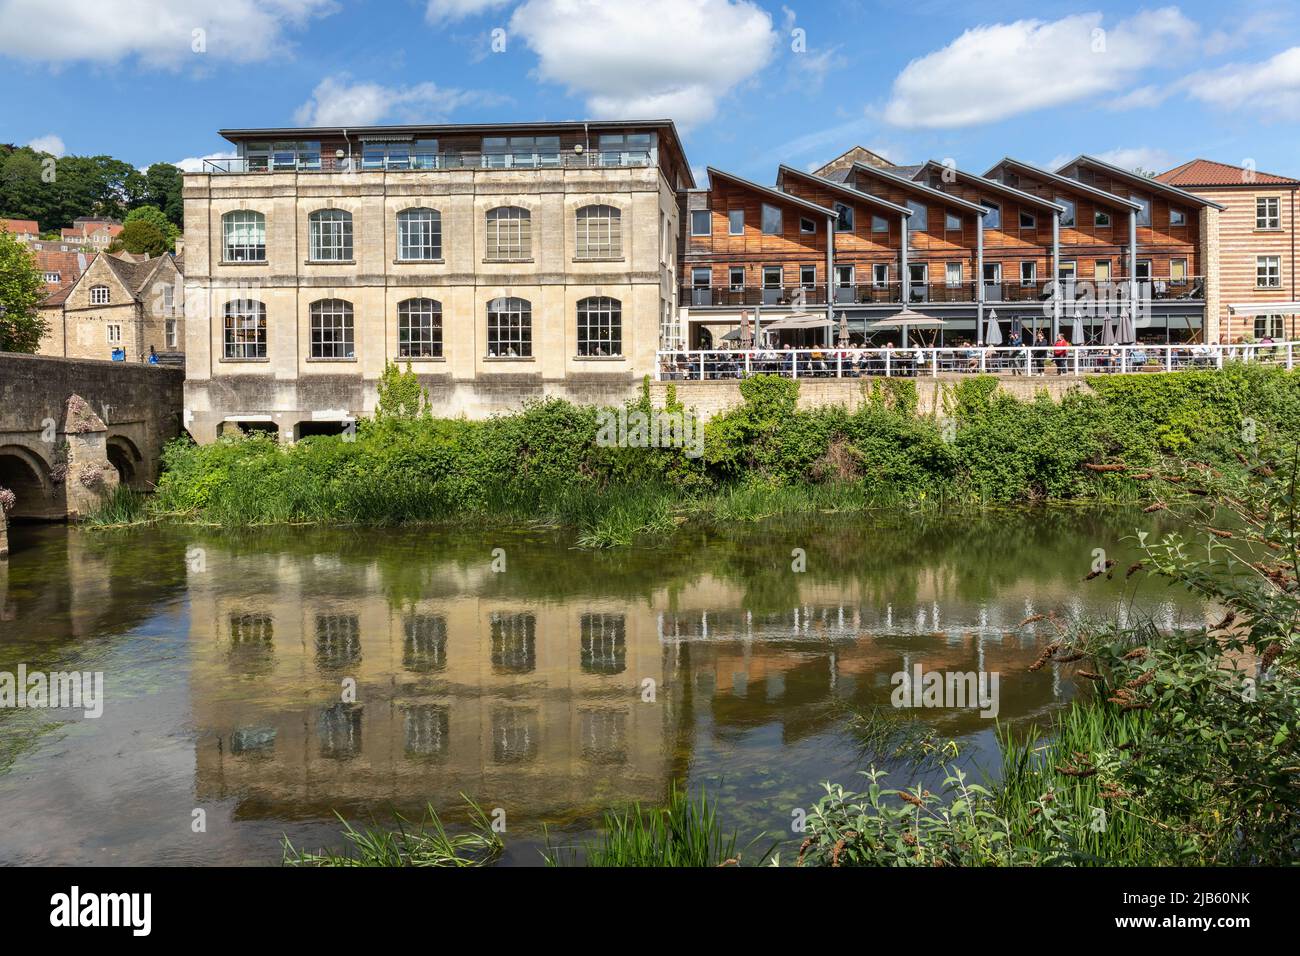 Historic town of Bradford on Avon picturing Kingston Mills and The Weaving Shed Restaurant with reflections in the River Avon, Wiltshire, England, UK Stock Photo